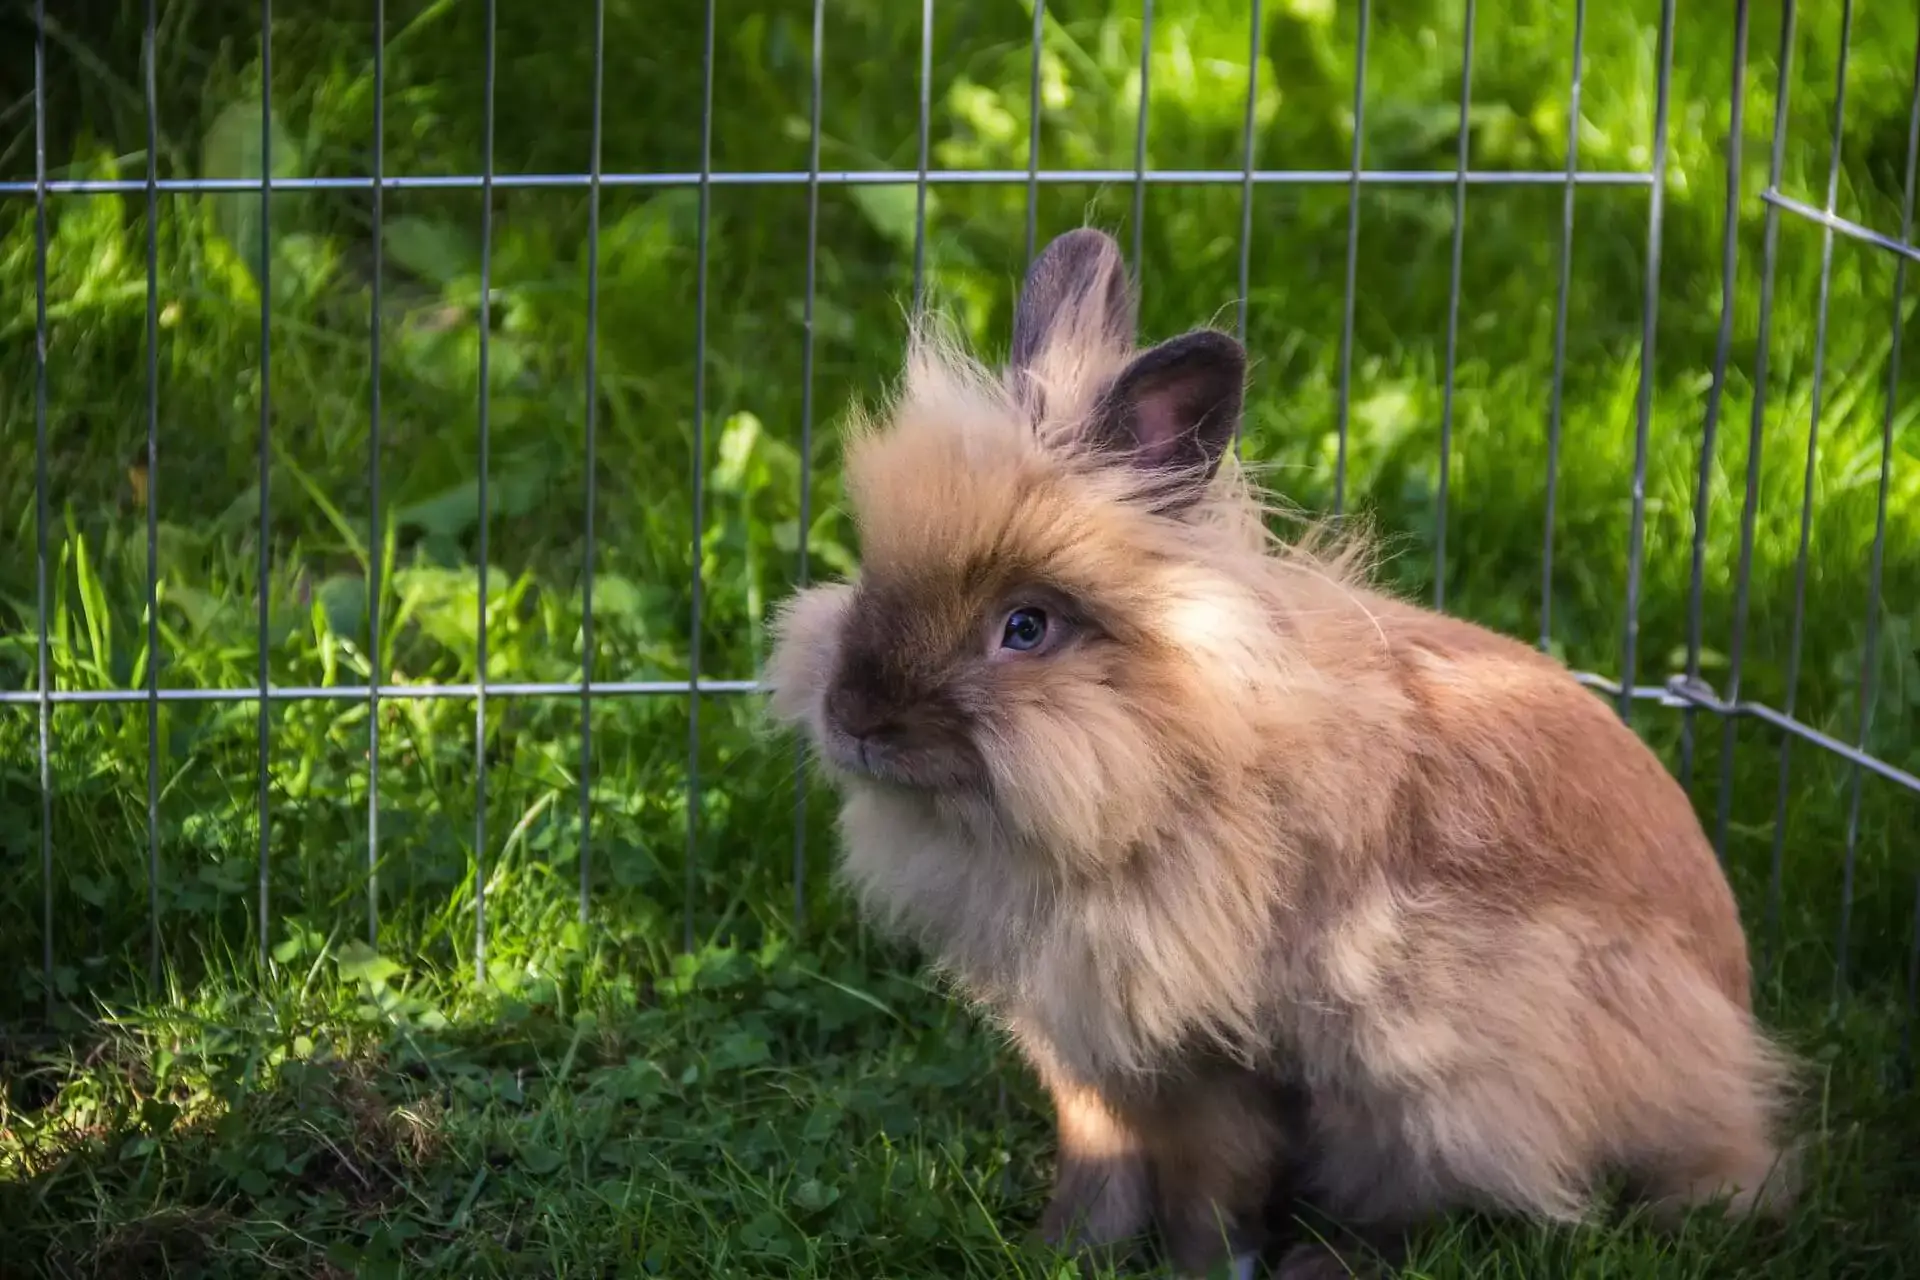 Fun Facts About Bunnies From An Oshawa, ON Veterinarian